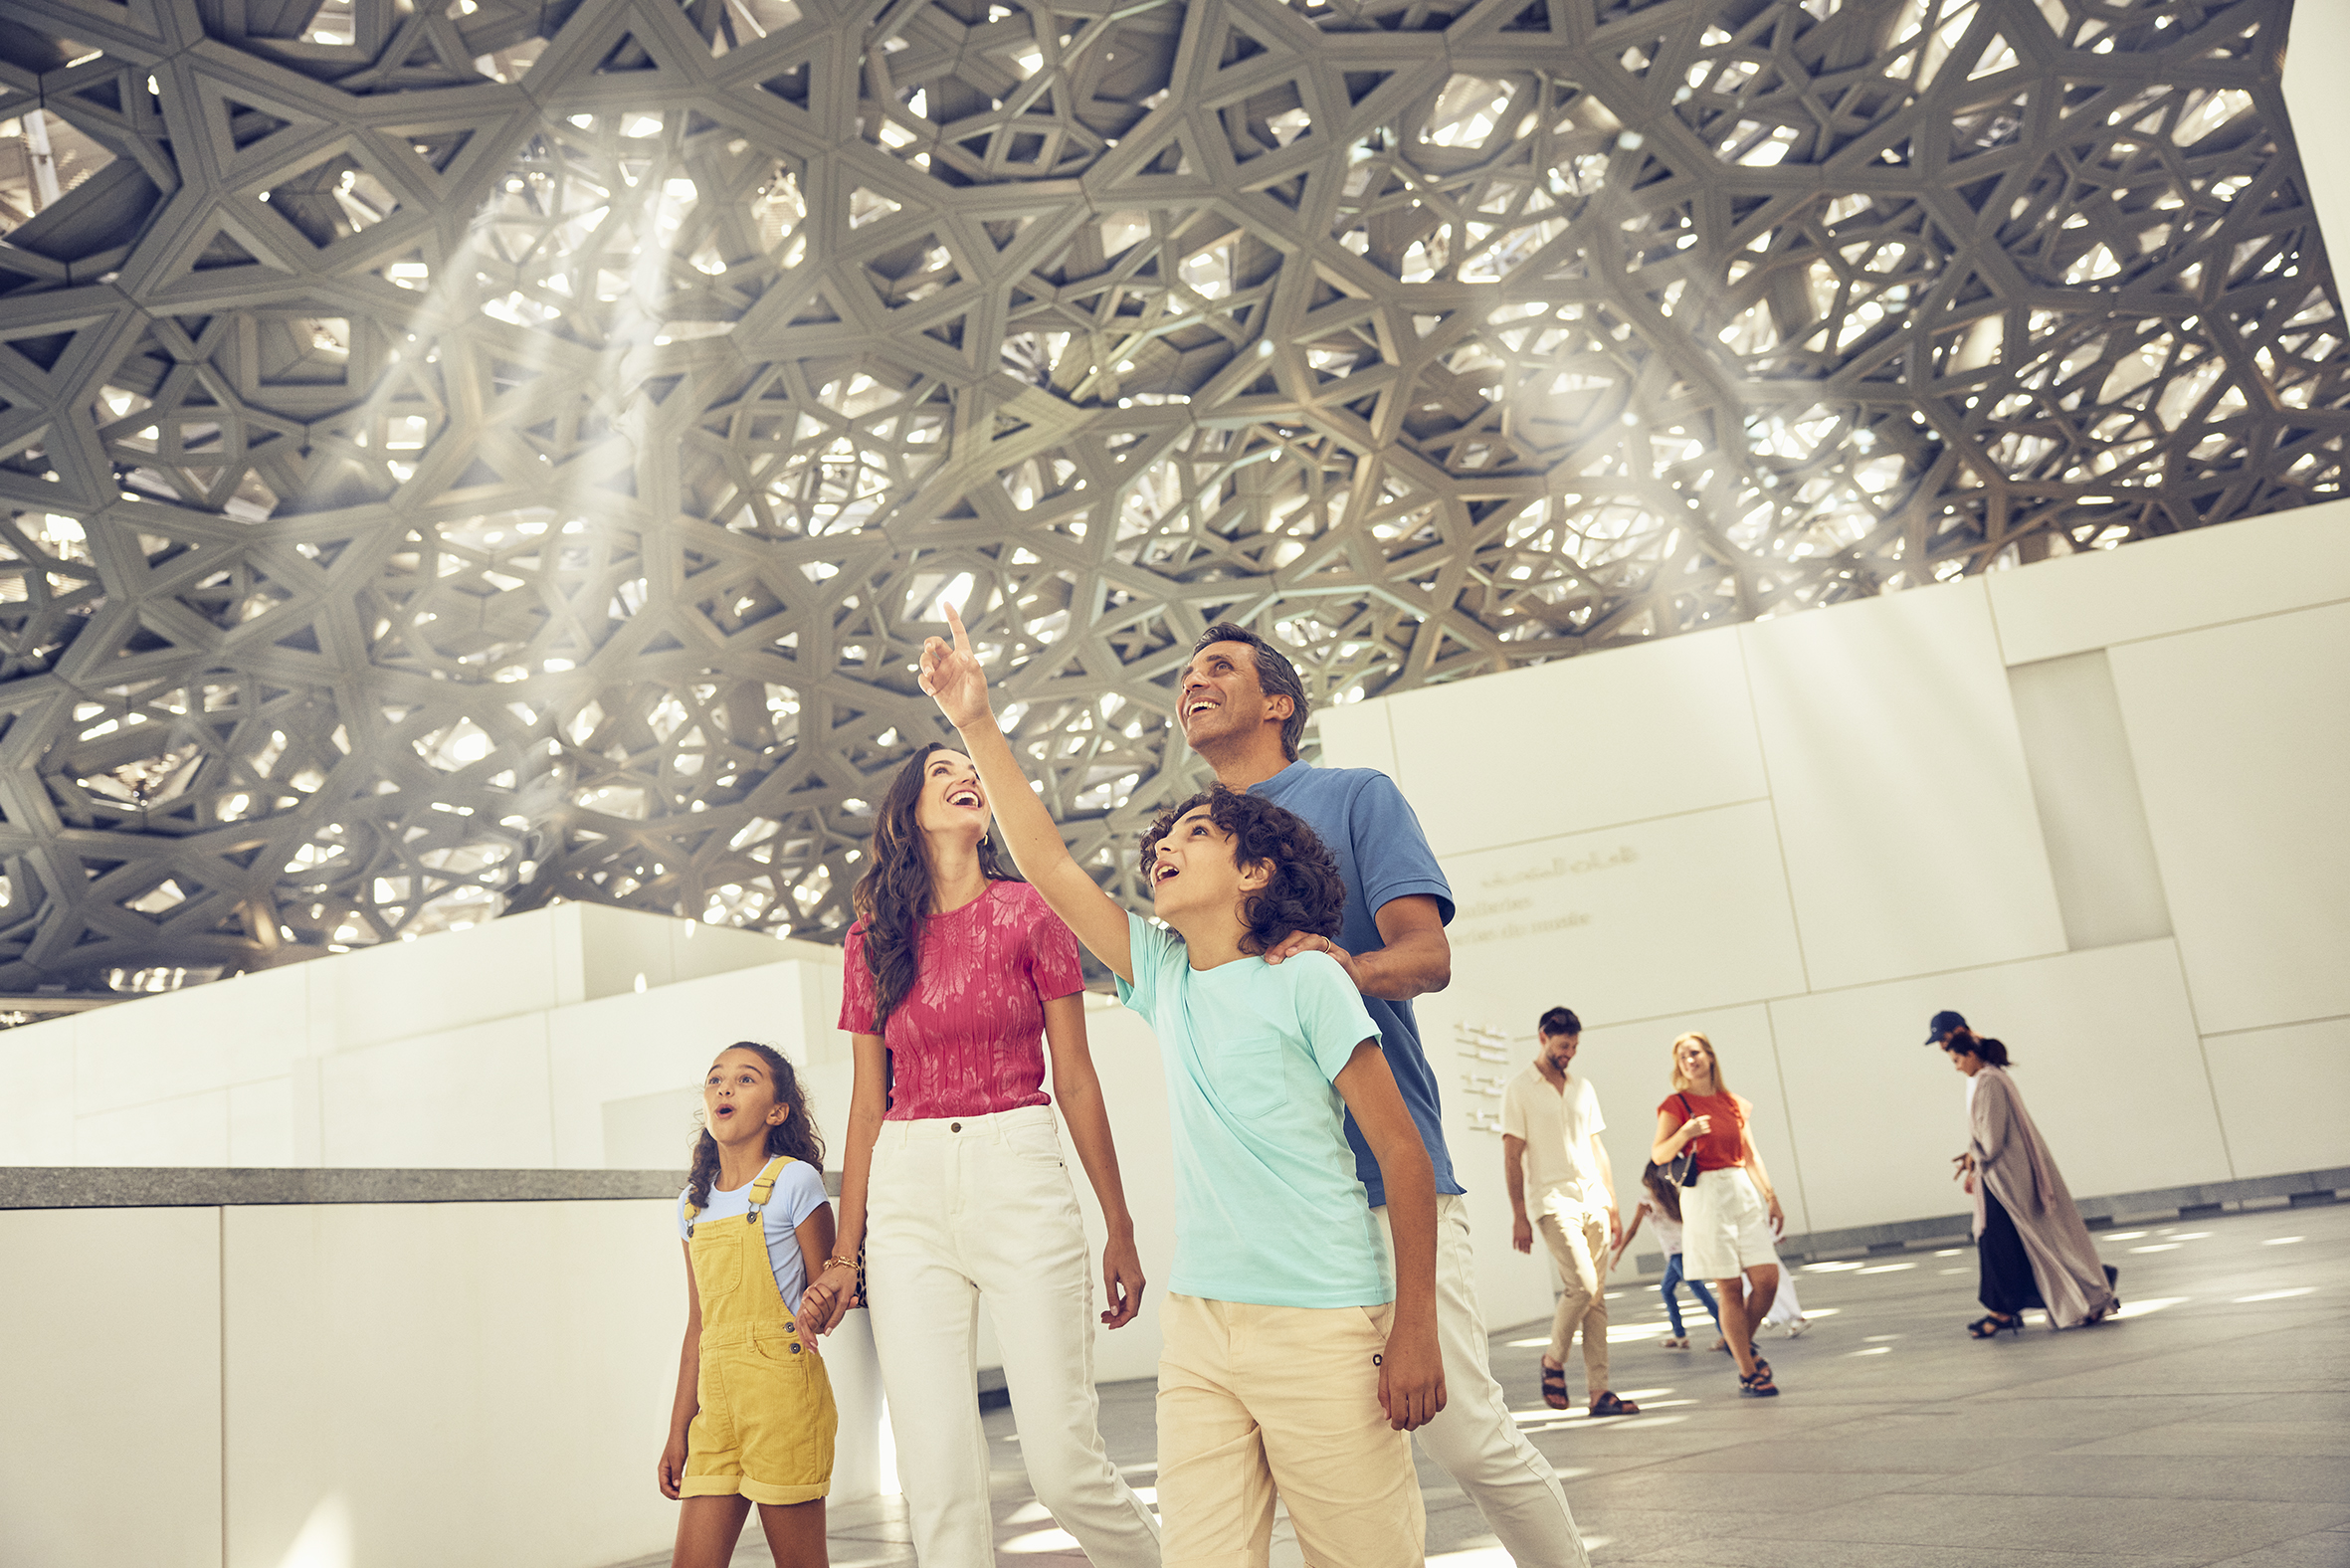 Western family marveling at the dome above the Louvre Abu Dhabi